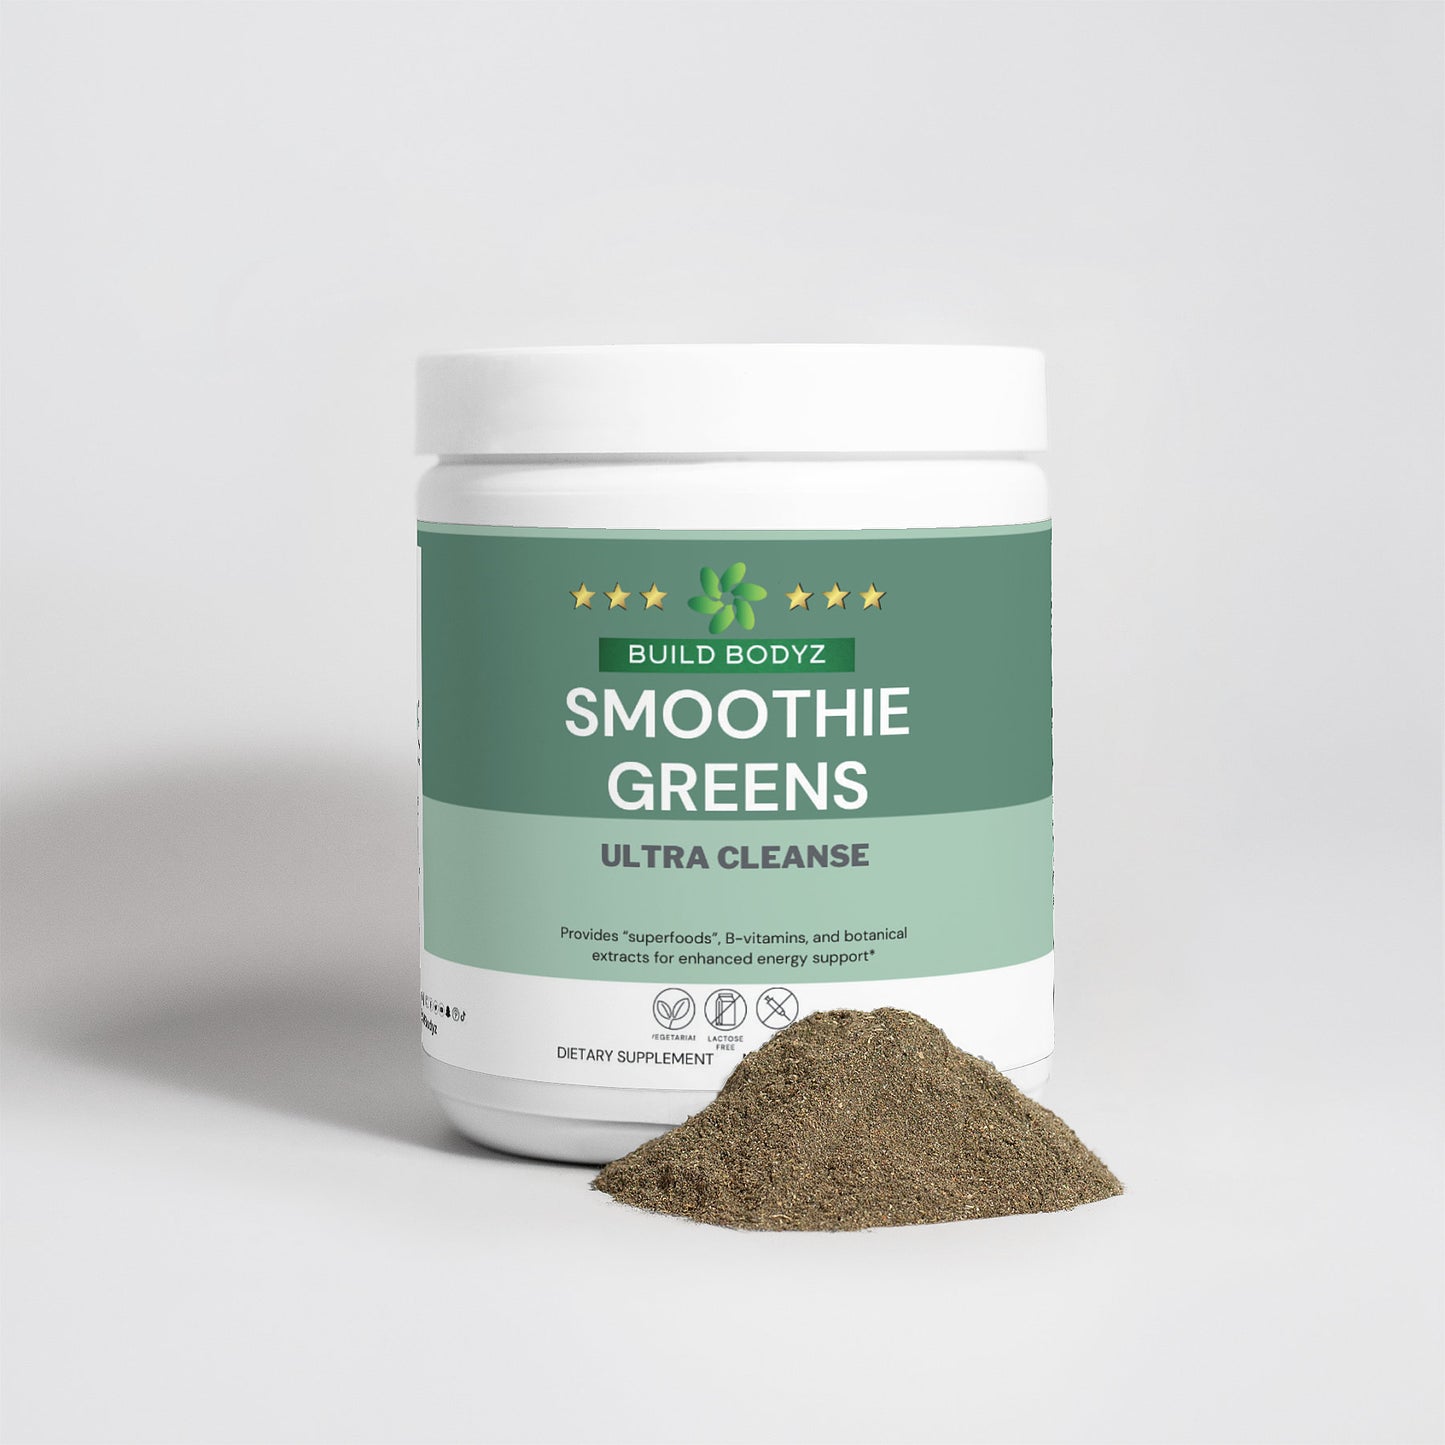 Ultra Cleanse Smoothie Greens: Organic Superfood Blend with B-Vitamins - 0.55lb (250g) - Vegetarian, and Lactose-Free